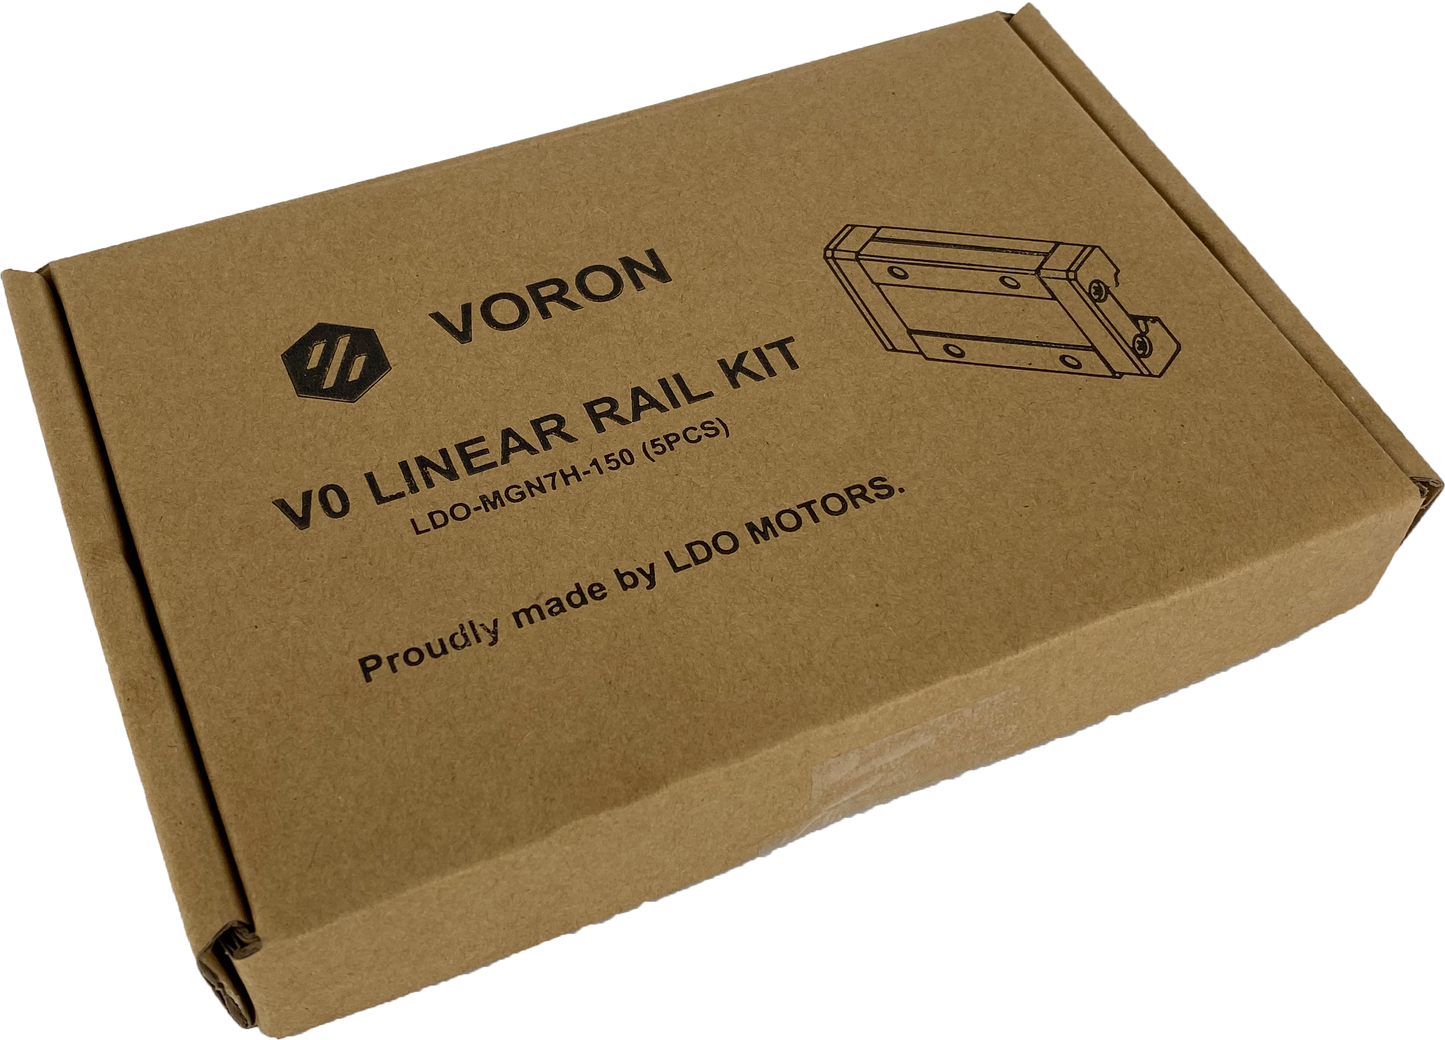 LDO Linear Rail MGN7H Linear Rail with Carriage (150mm) 5 pack Voron V0 and V0.1